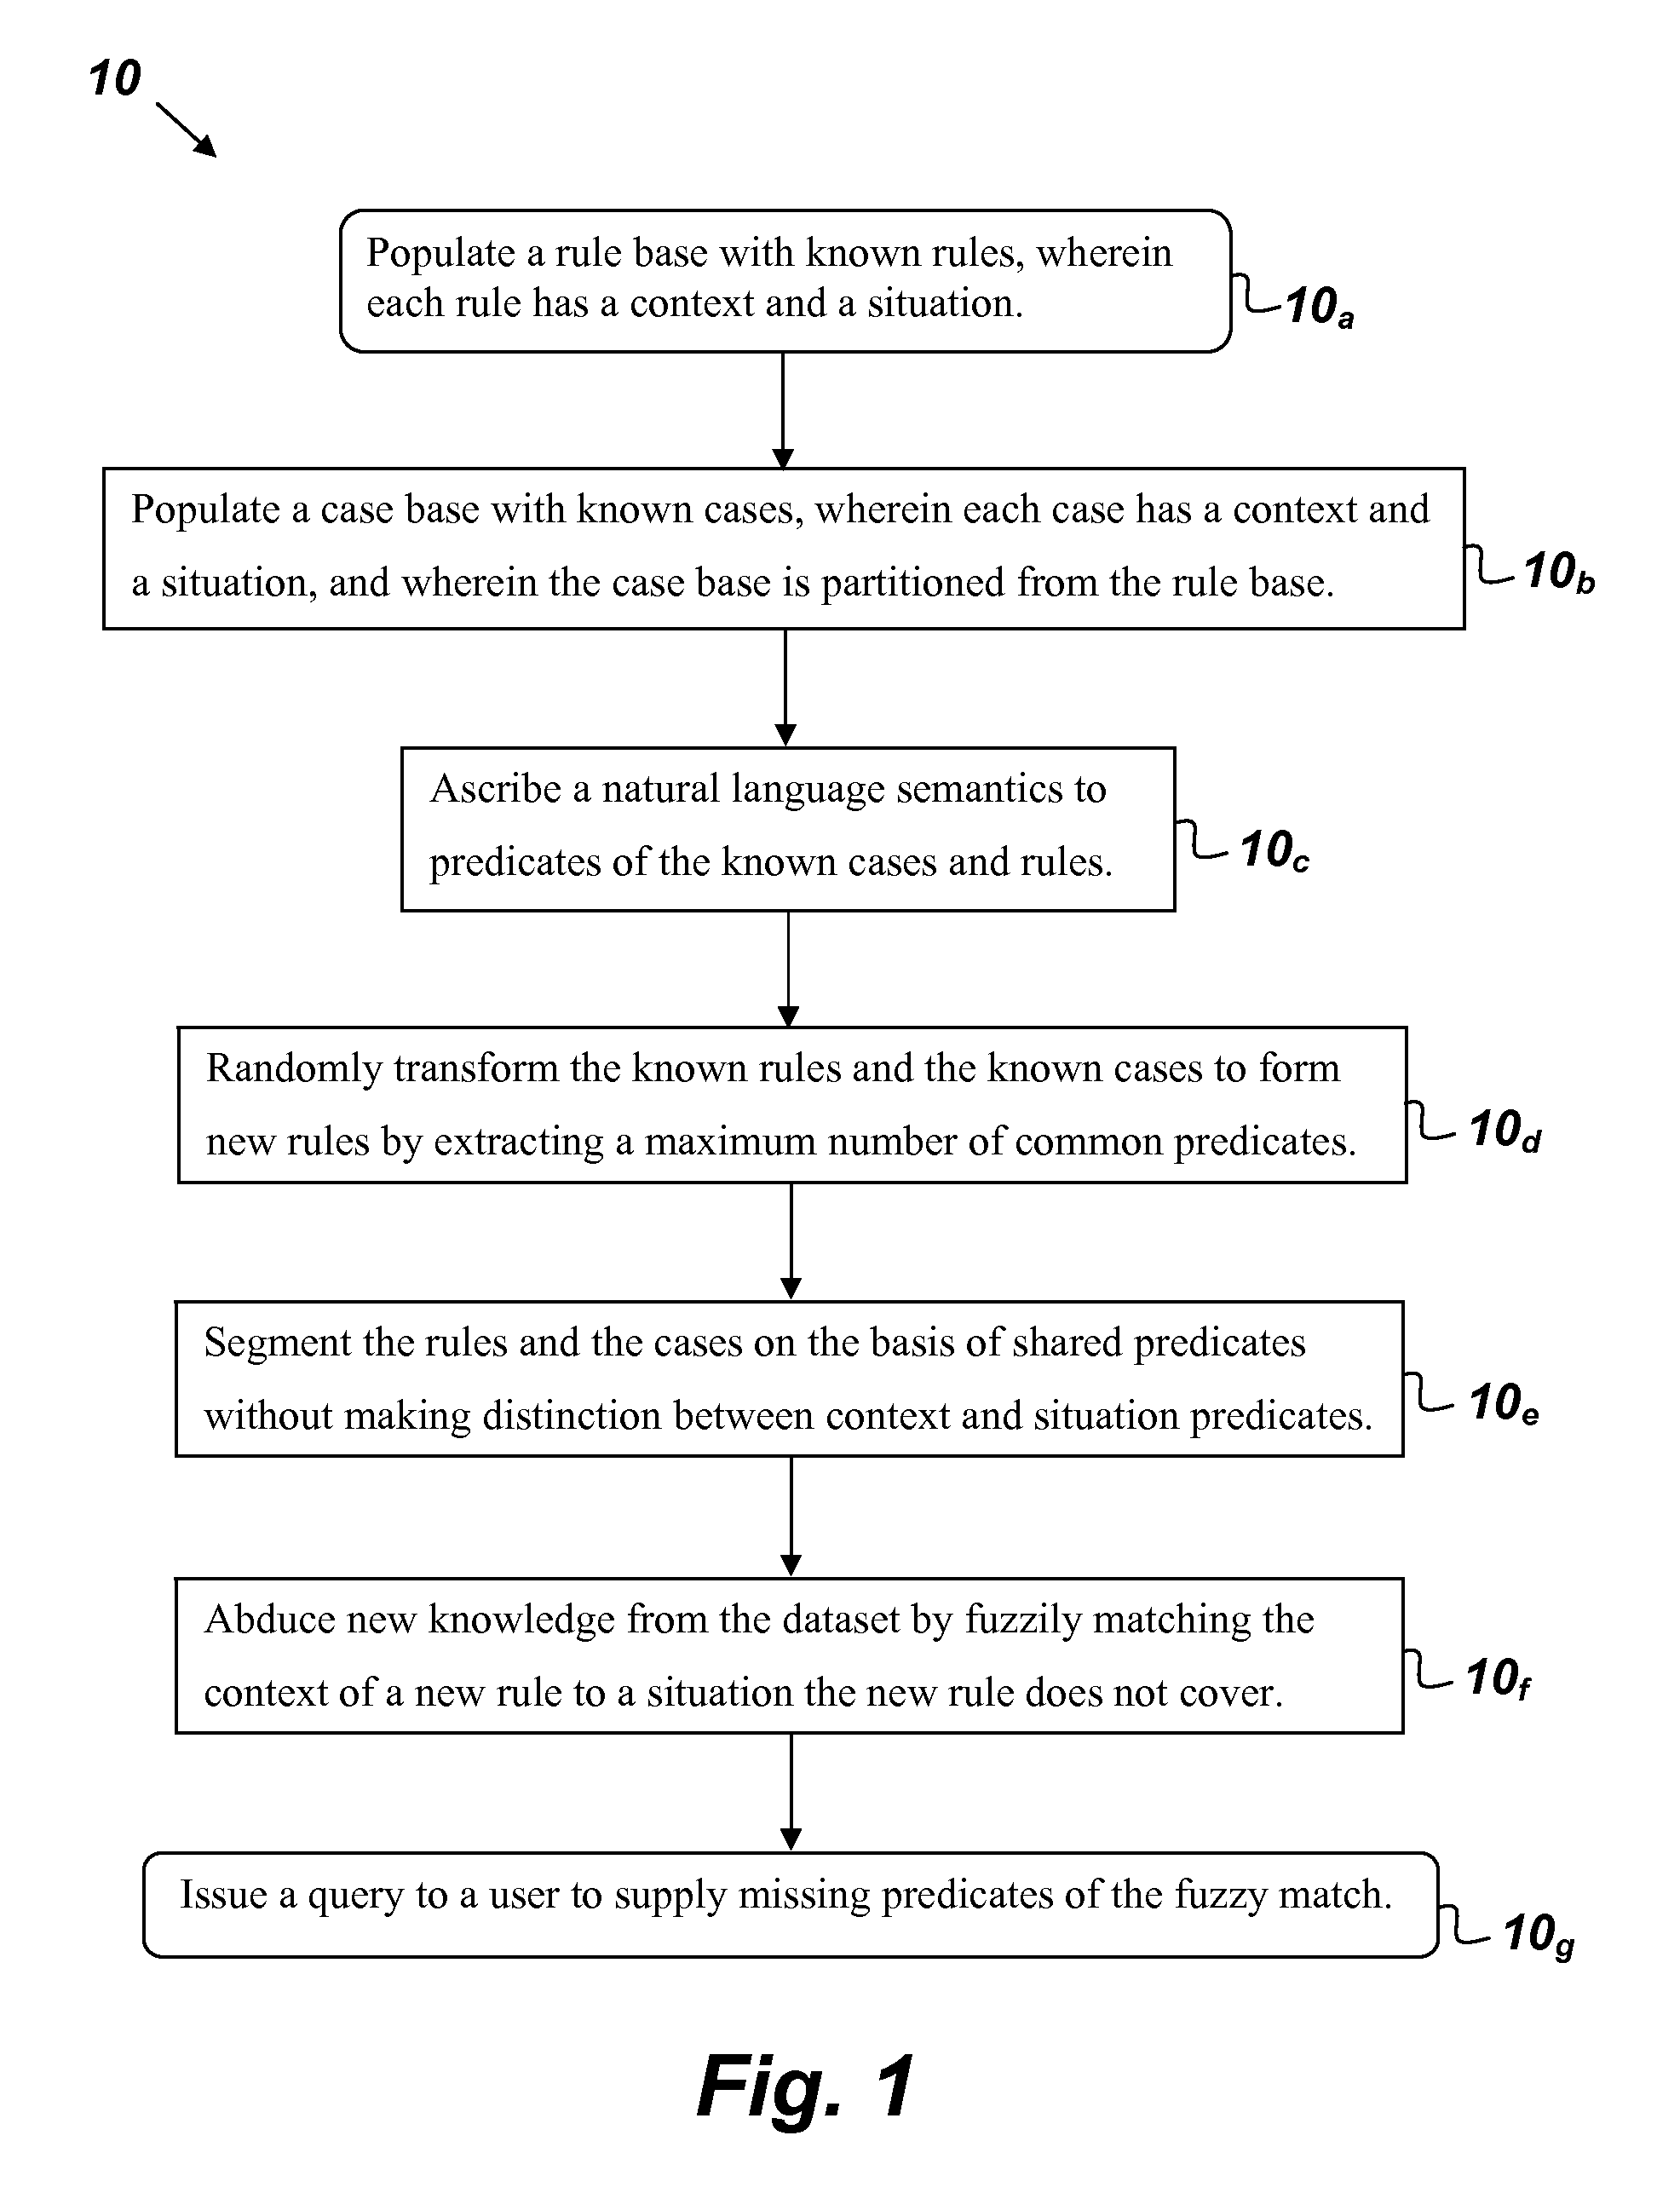 System and method for mining large, diverse, distributed, and heterogeneous datasets